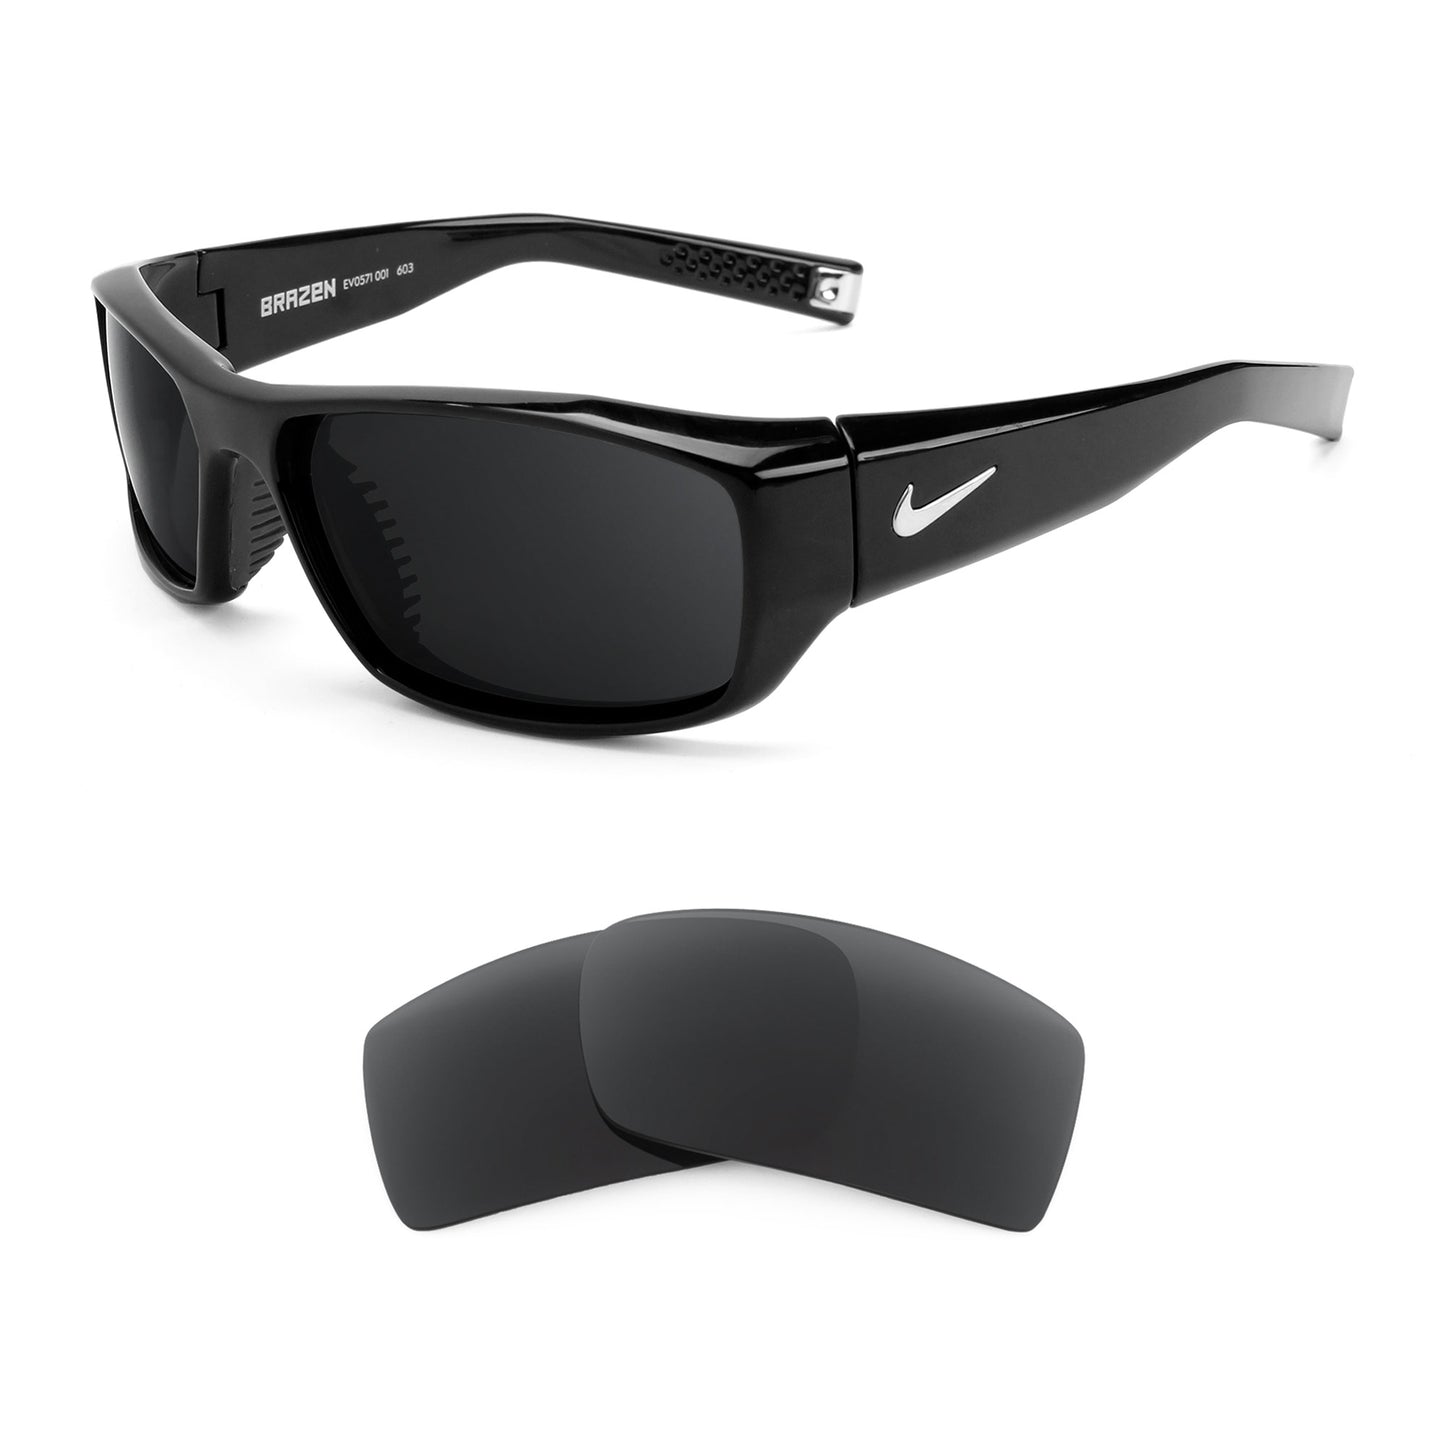 Nike Brazen sunglasses with replacement lenses